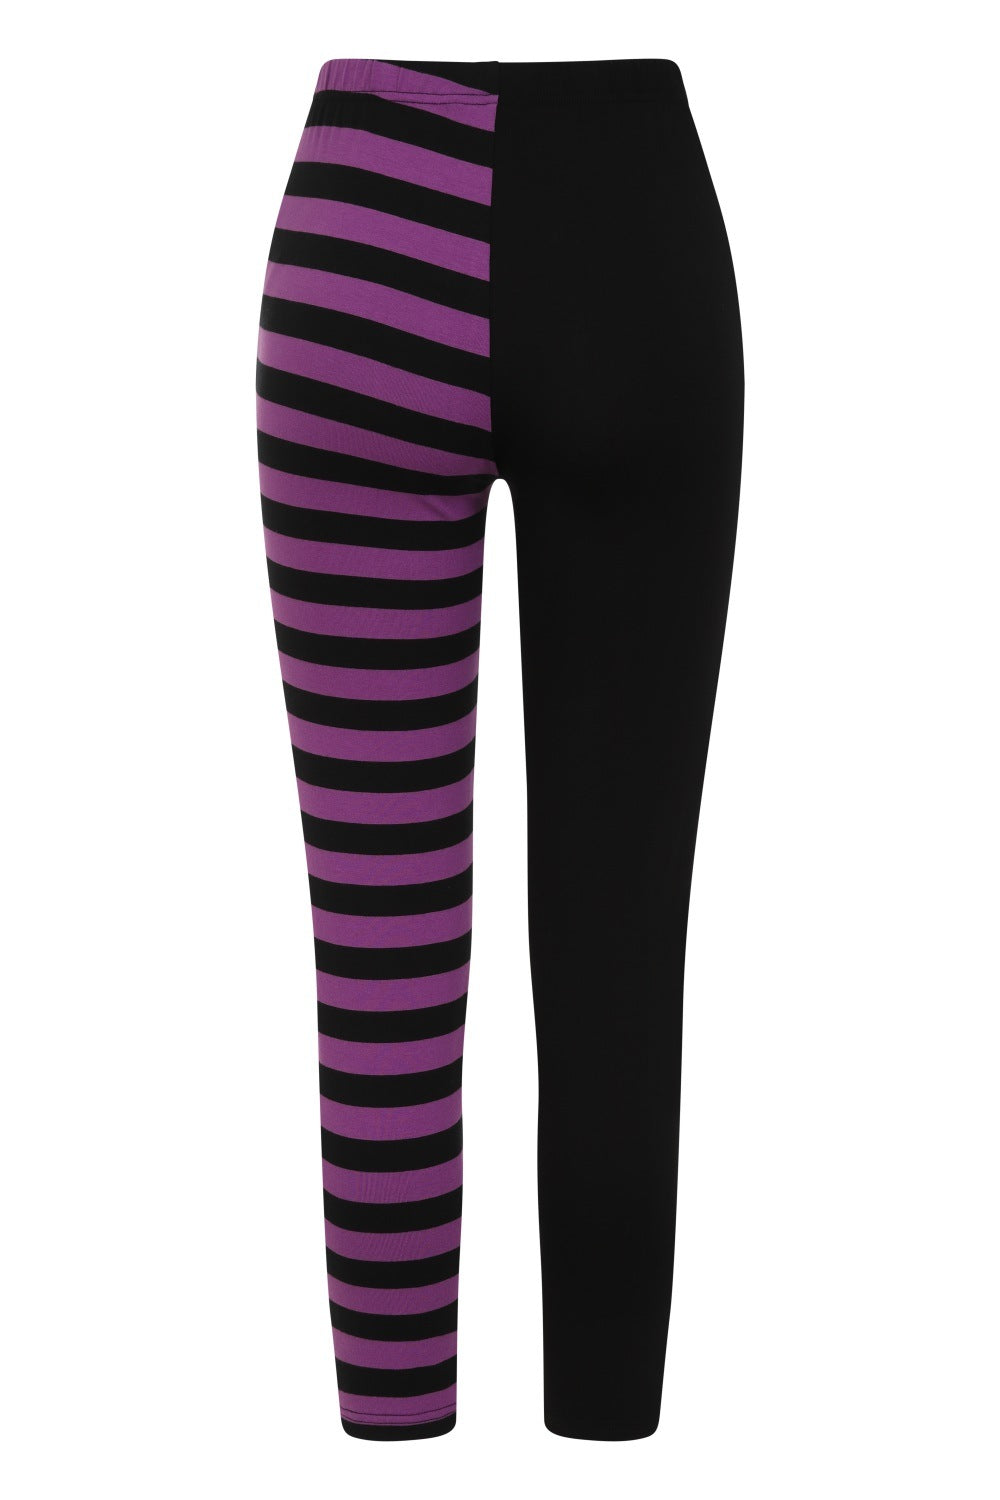 High waisted leggings with one striped purple leg and zip waist 